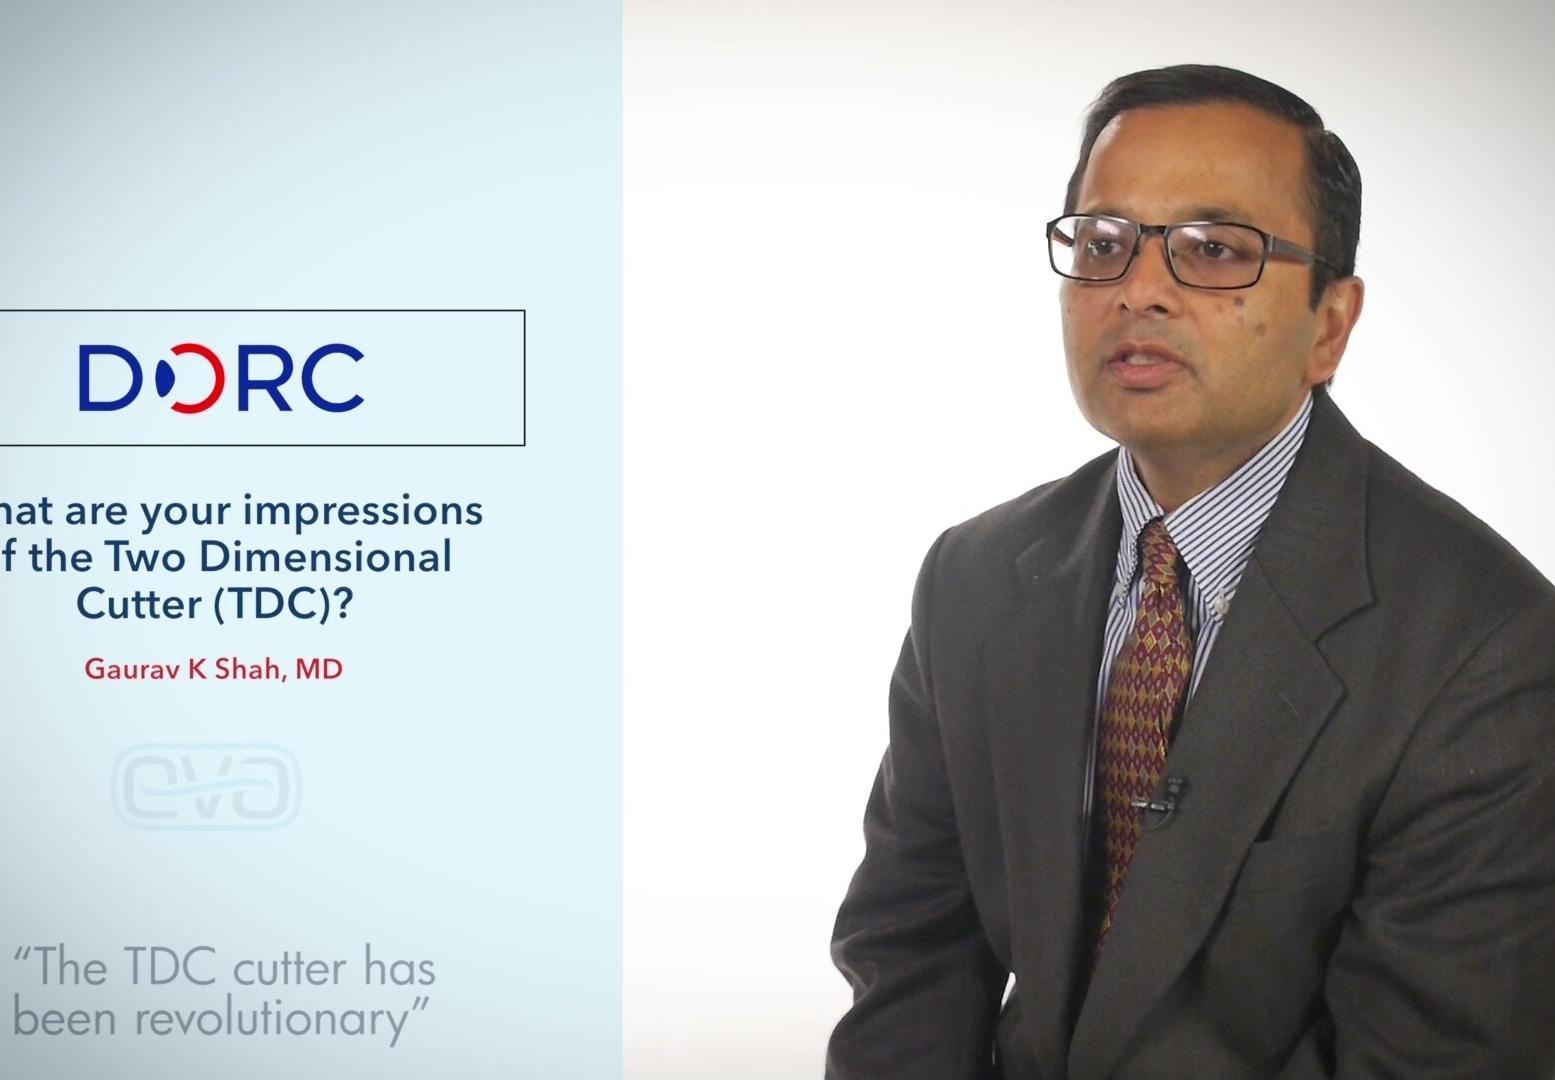 Gaurav K Shah, MD, USA, describes his experience and impression of EVA